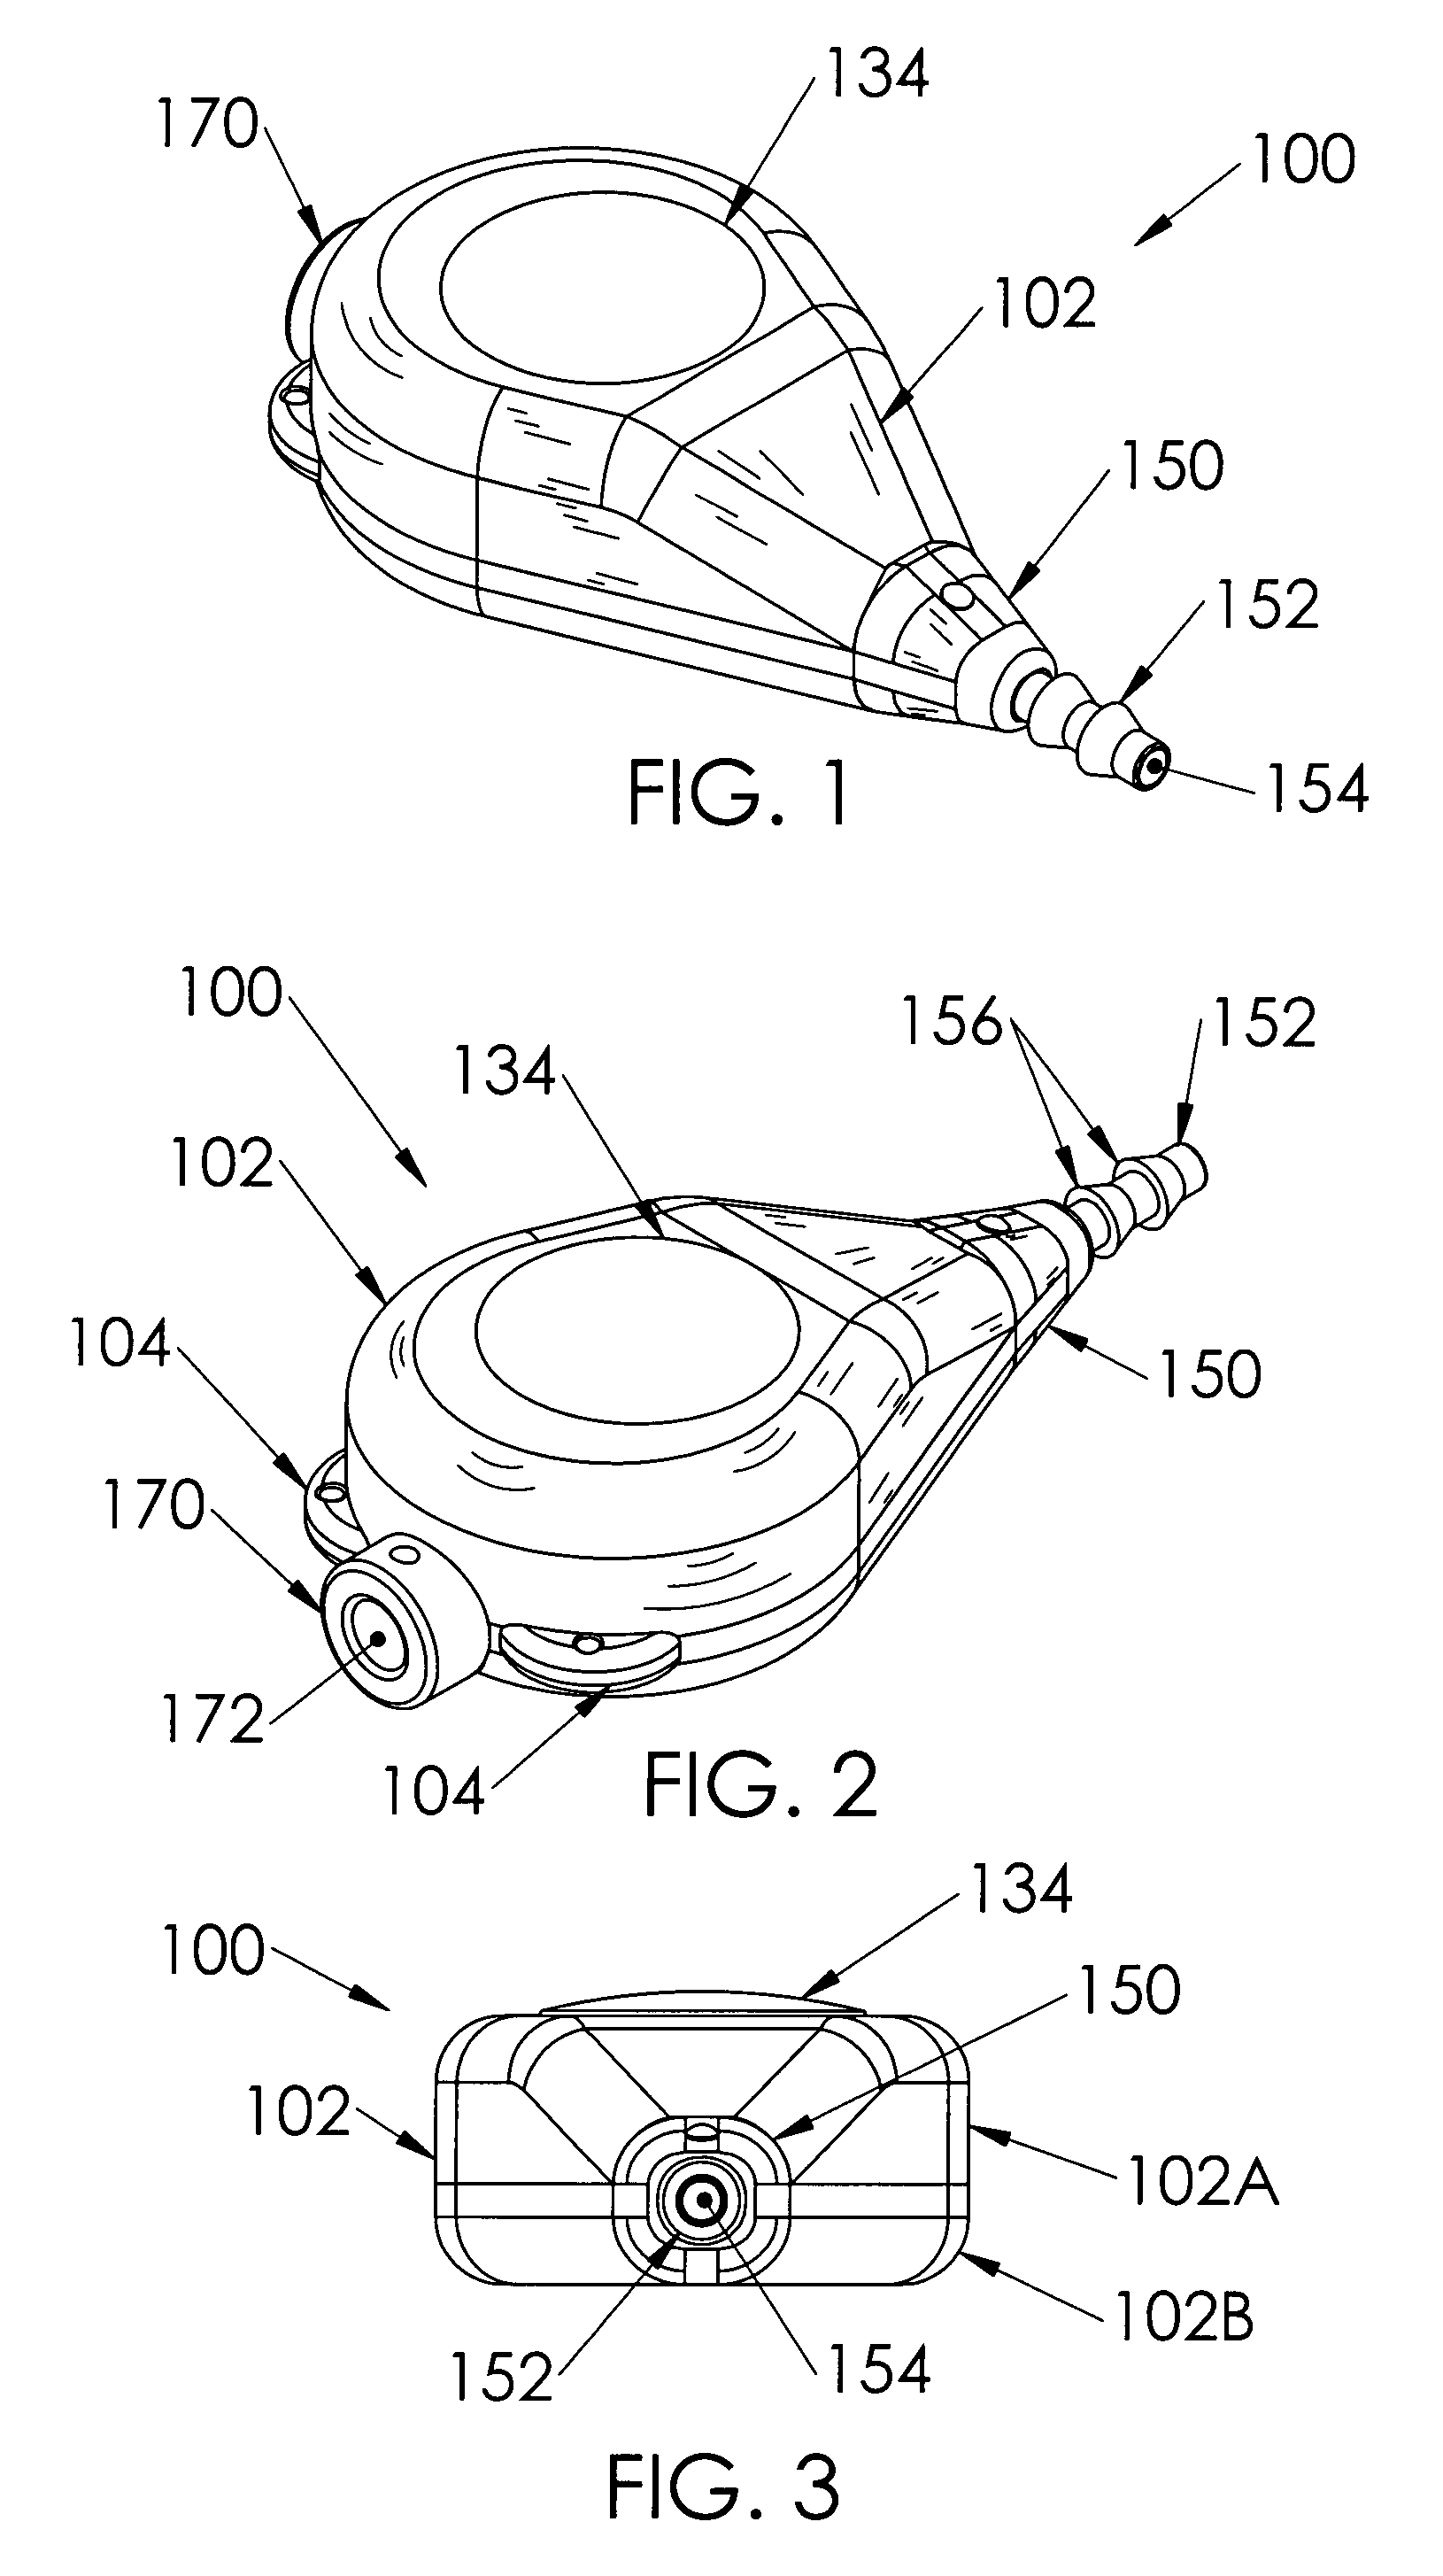 Venous access port assembly and methods of assembly and use